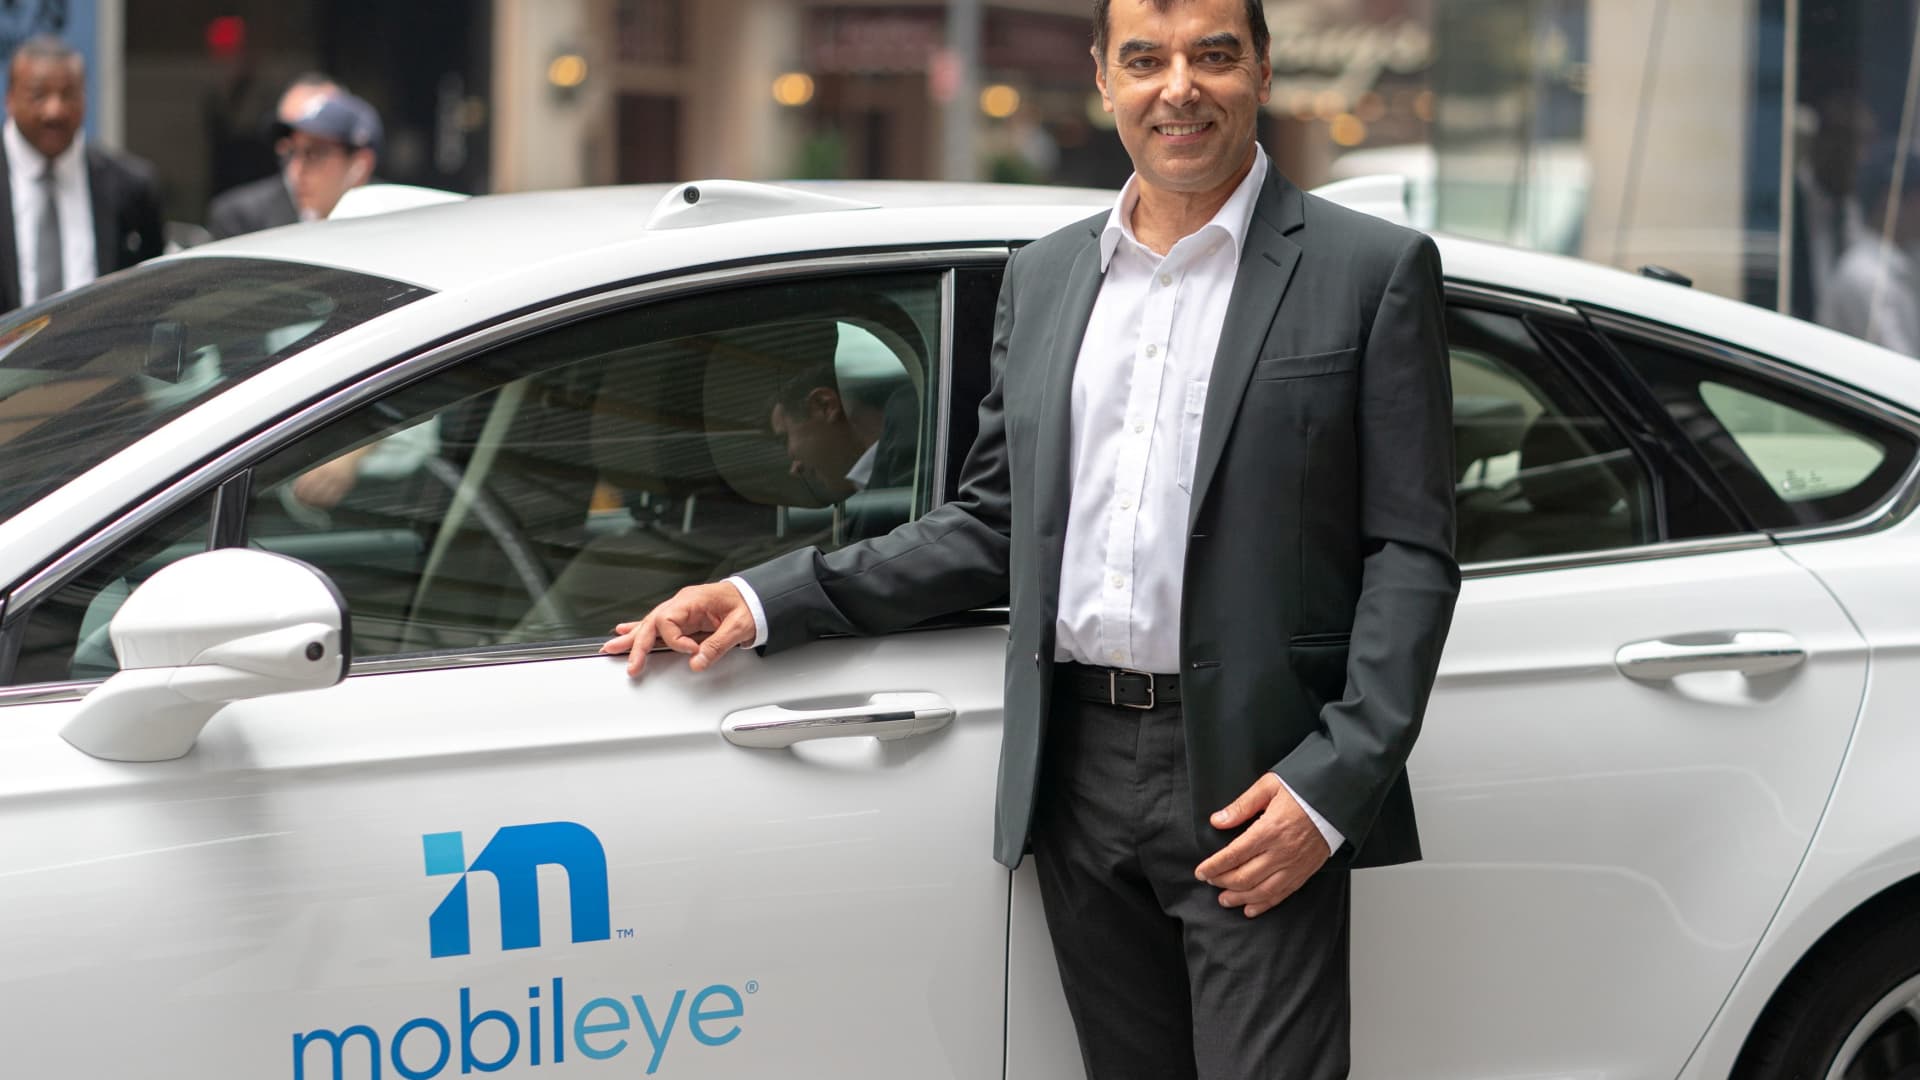 Intel’s self-driving car division Mobileye files for IPO Auto Recent